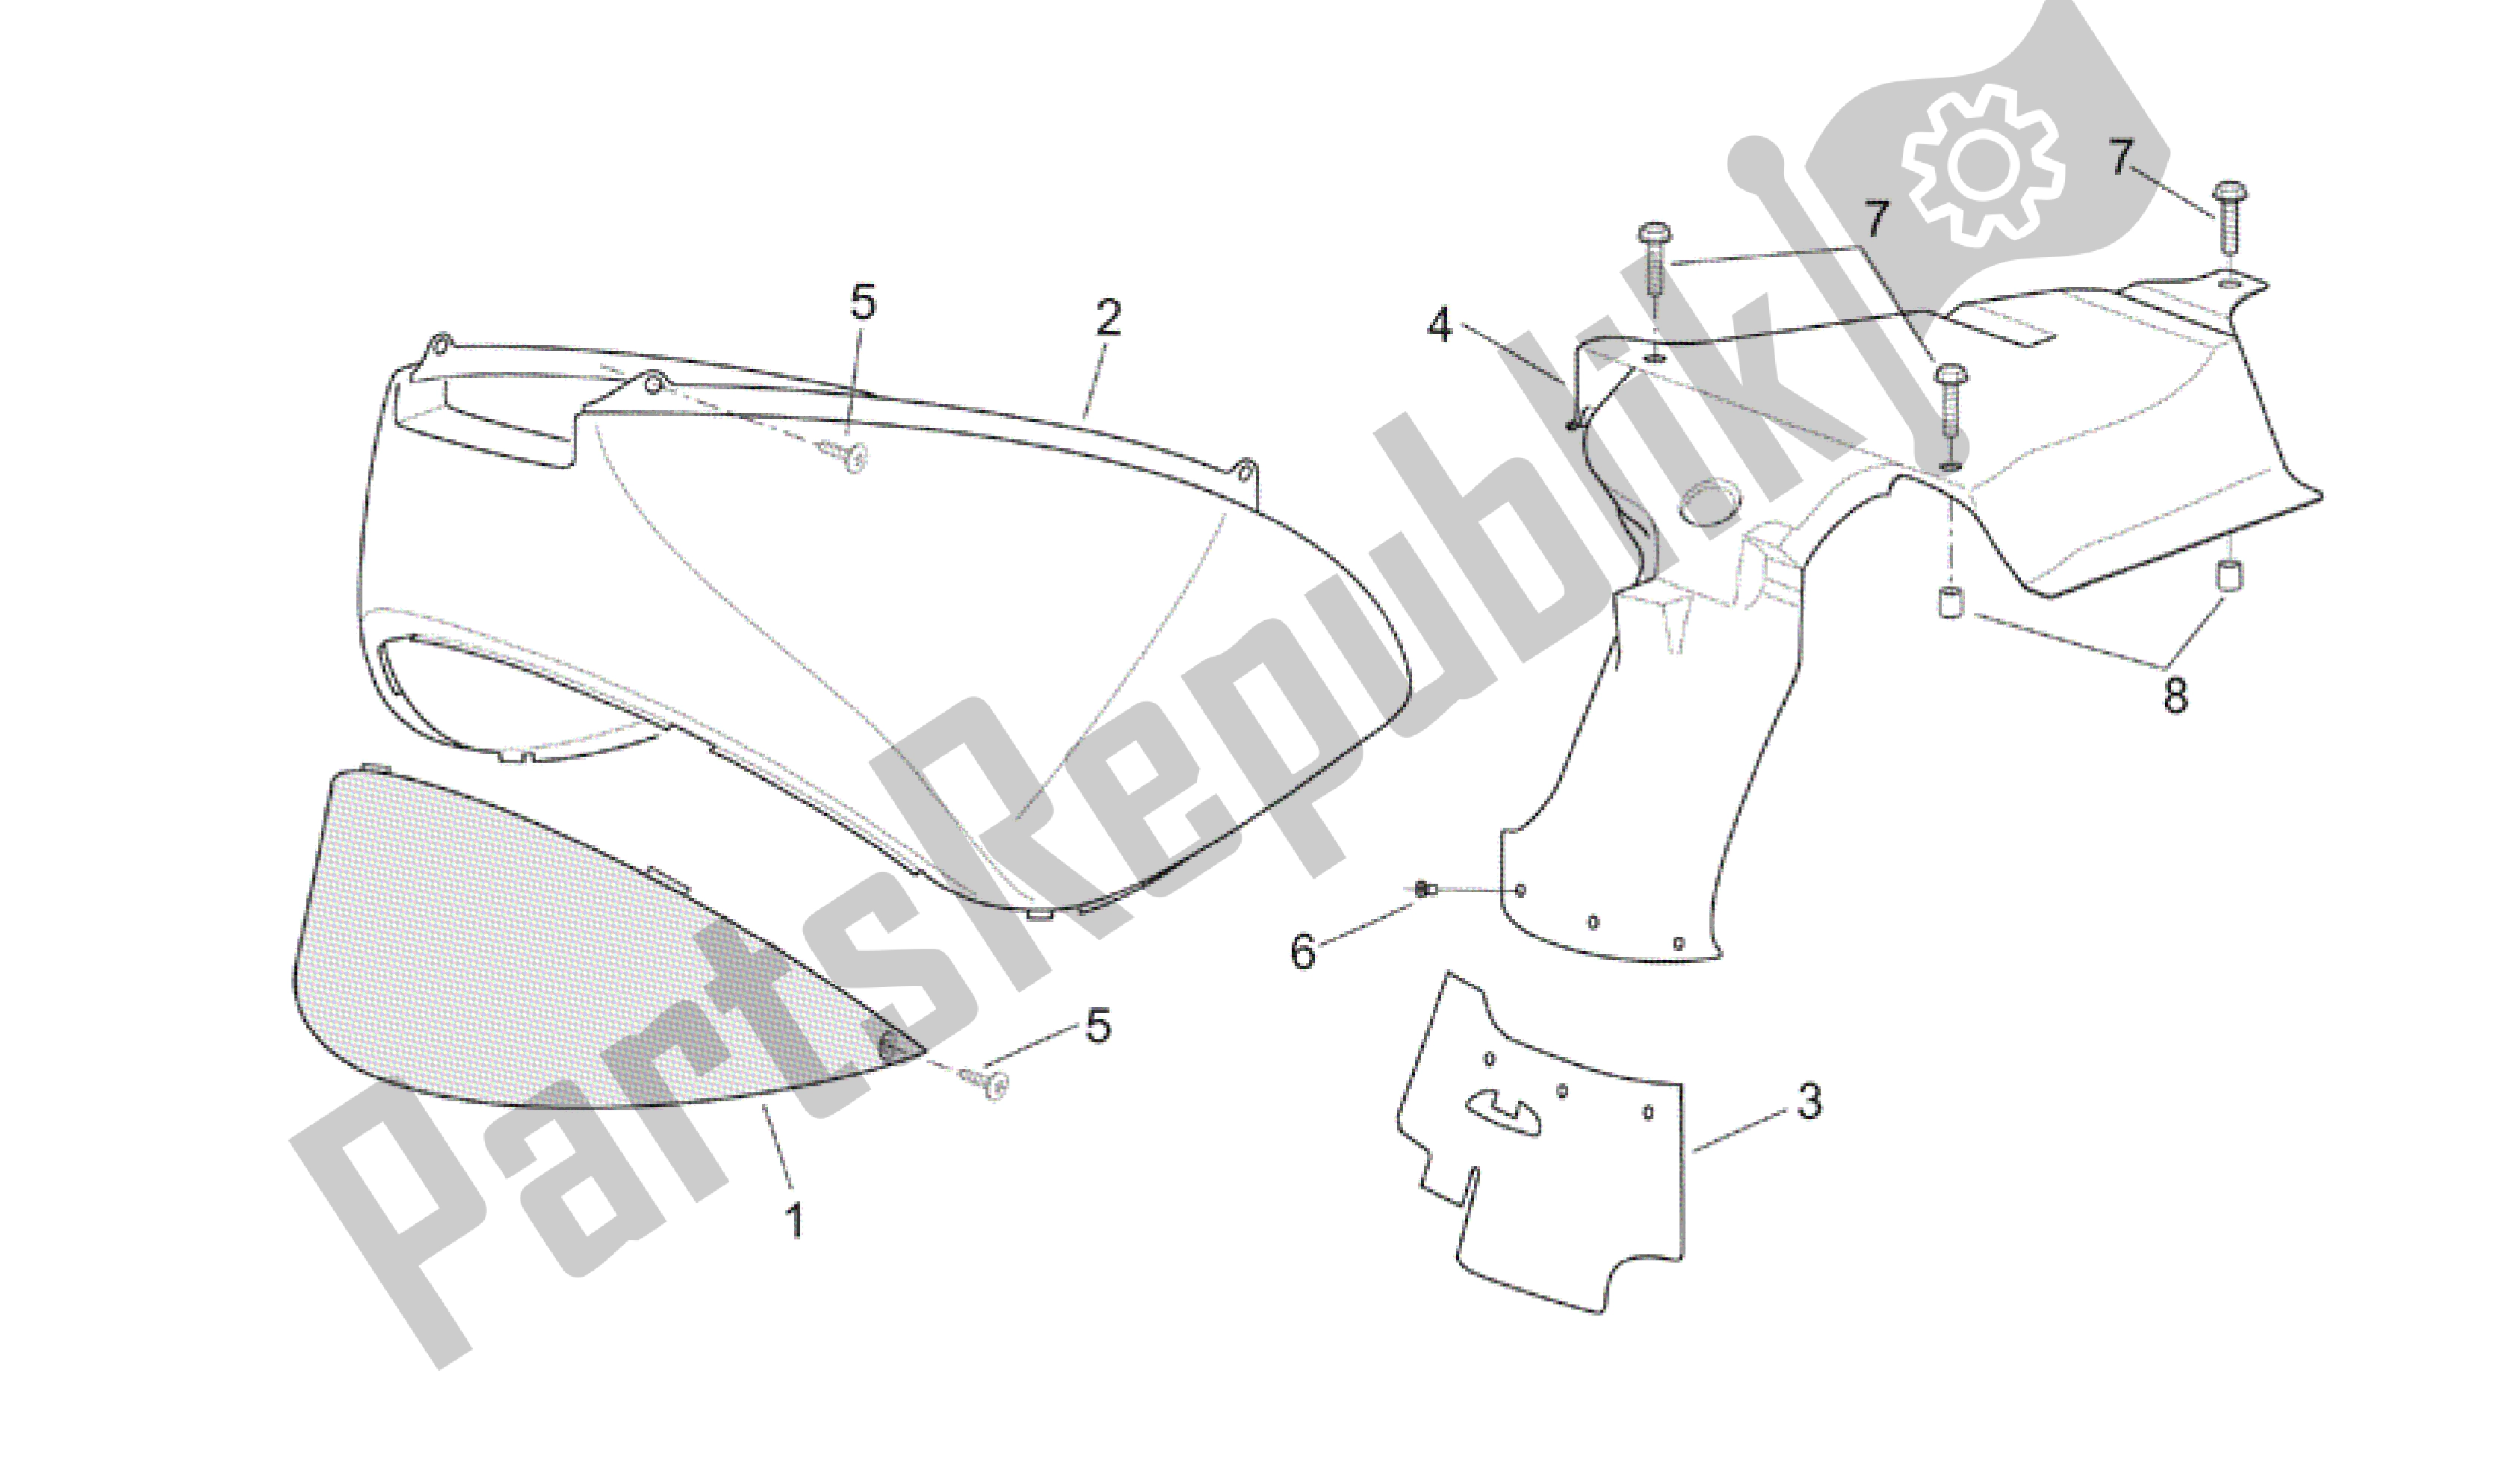 All parts for the Rear Body I of the Aprilia Scarabeo 200 1999 - 2004